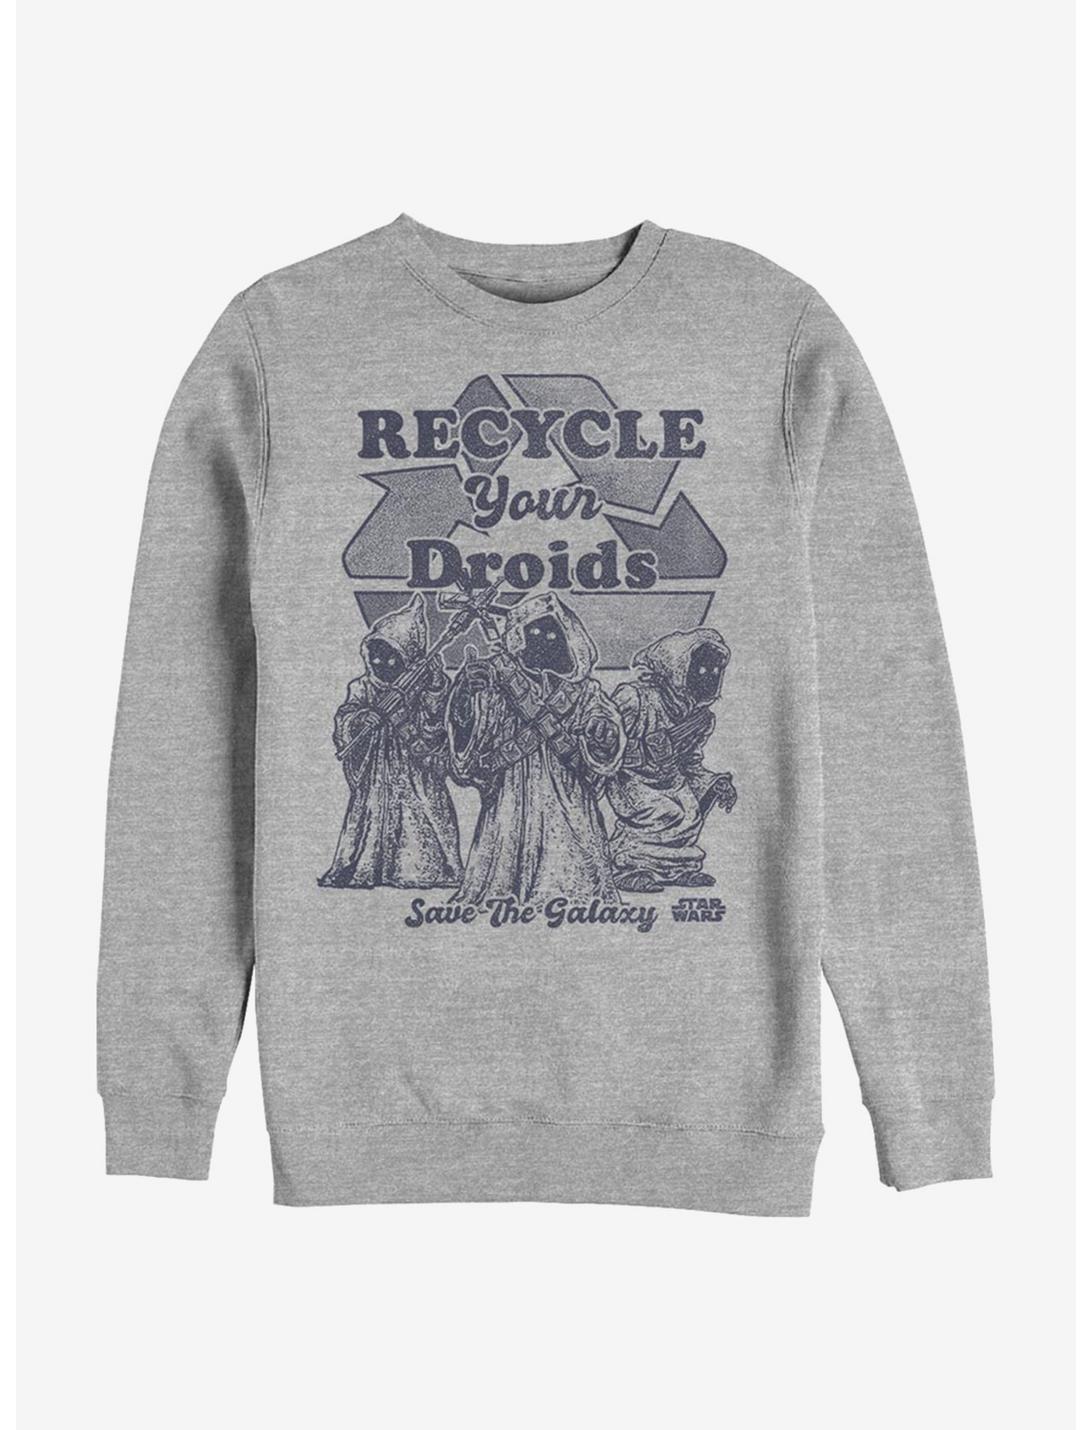 Star Wars Recycle Your Droids Crew Sweatshirt, ATH HTR, hi-res